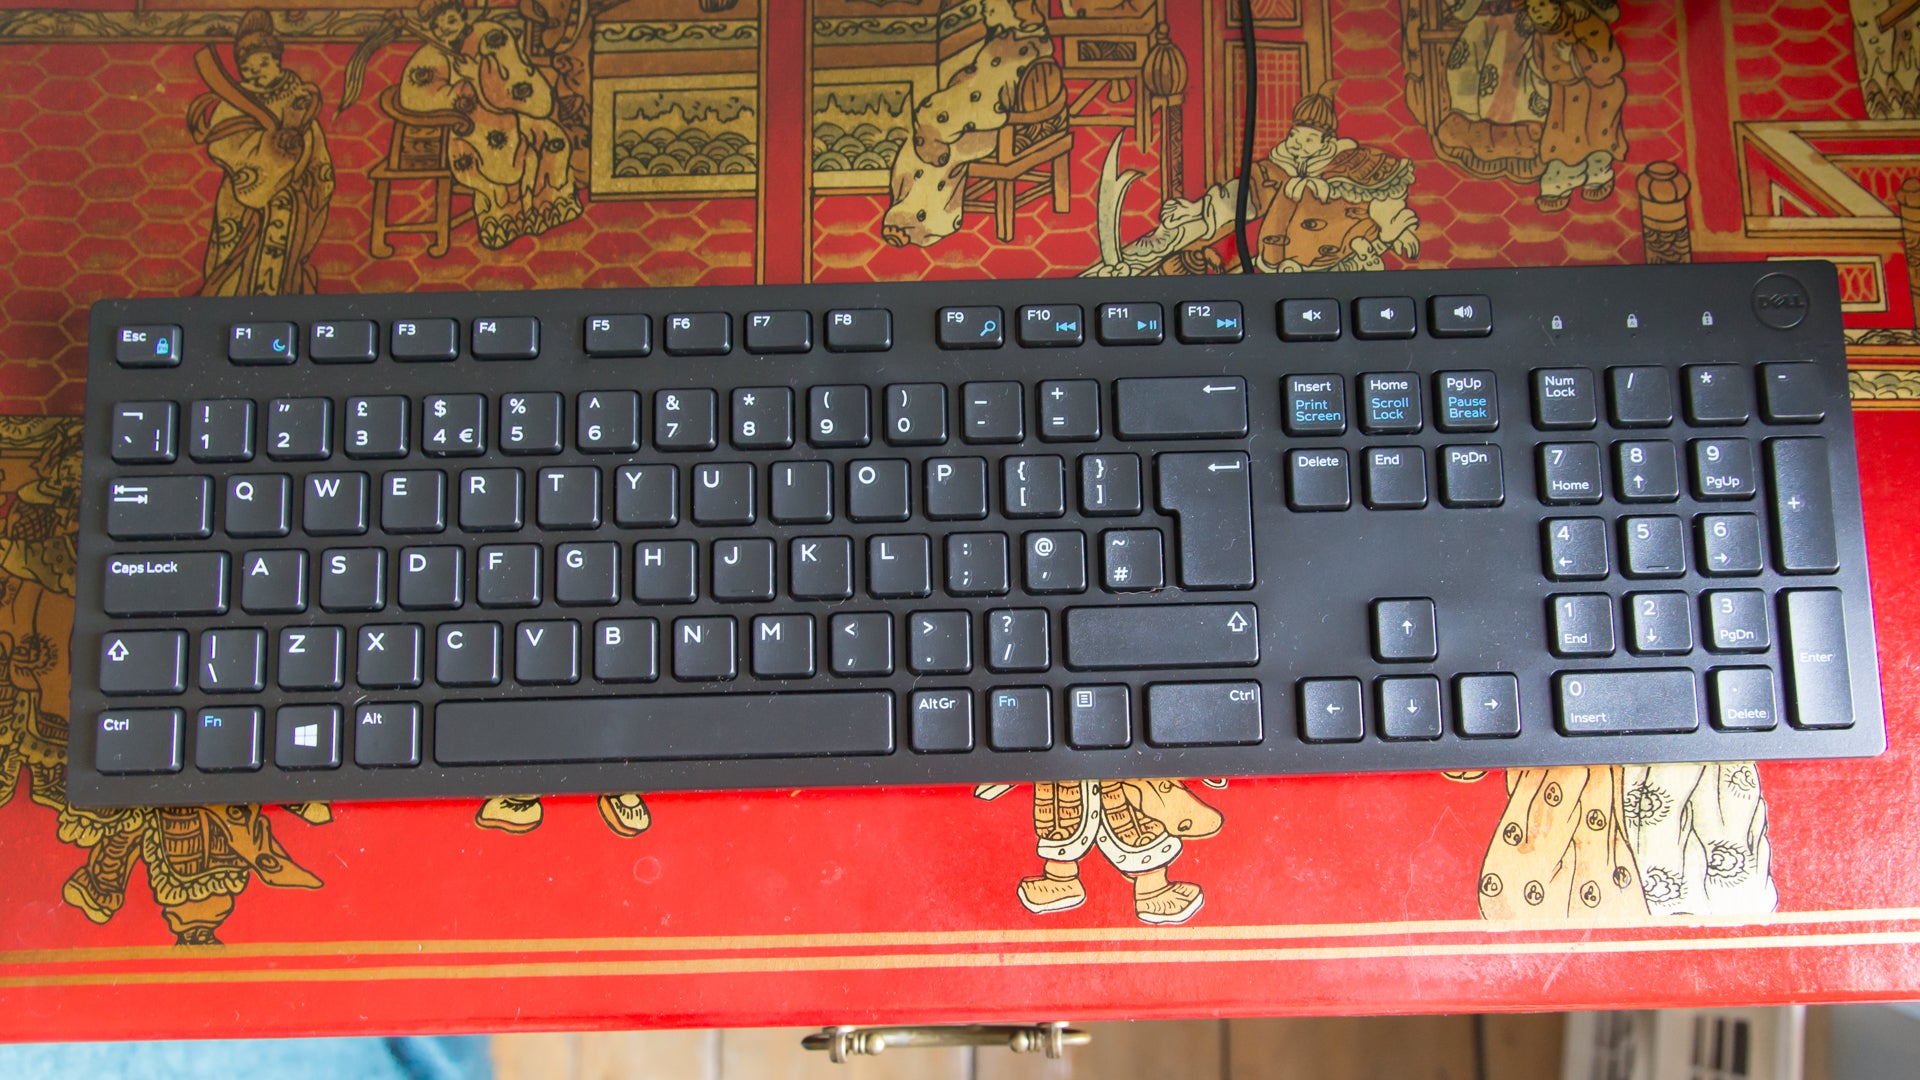 Dell keyboard on a decorative red table.